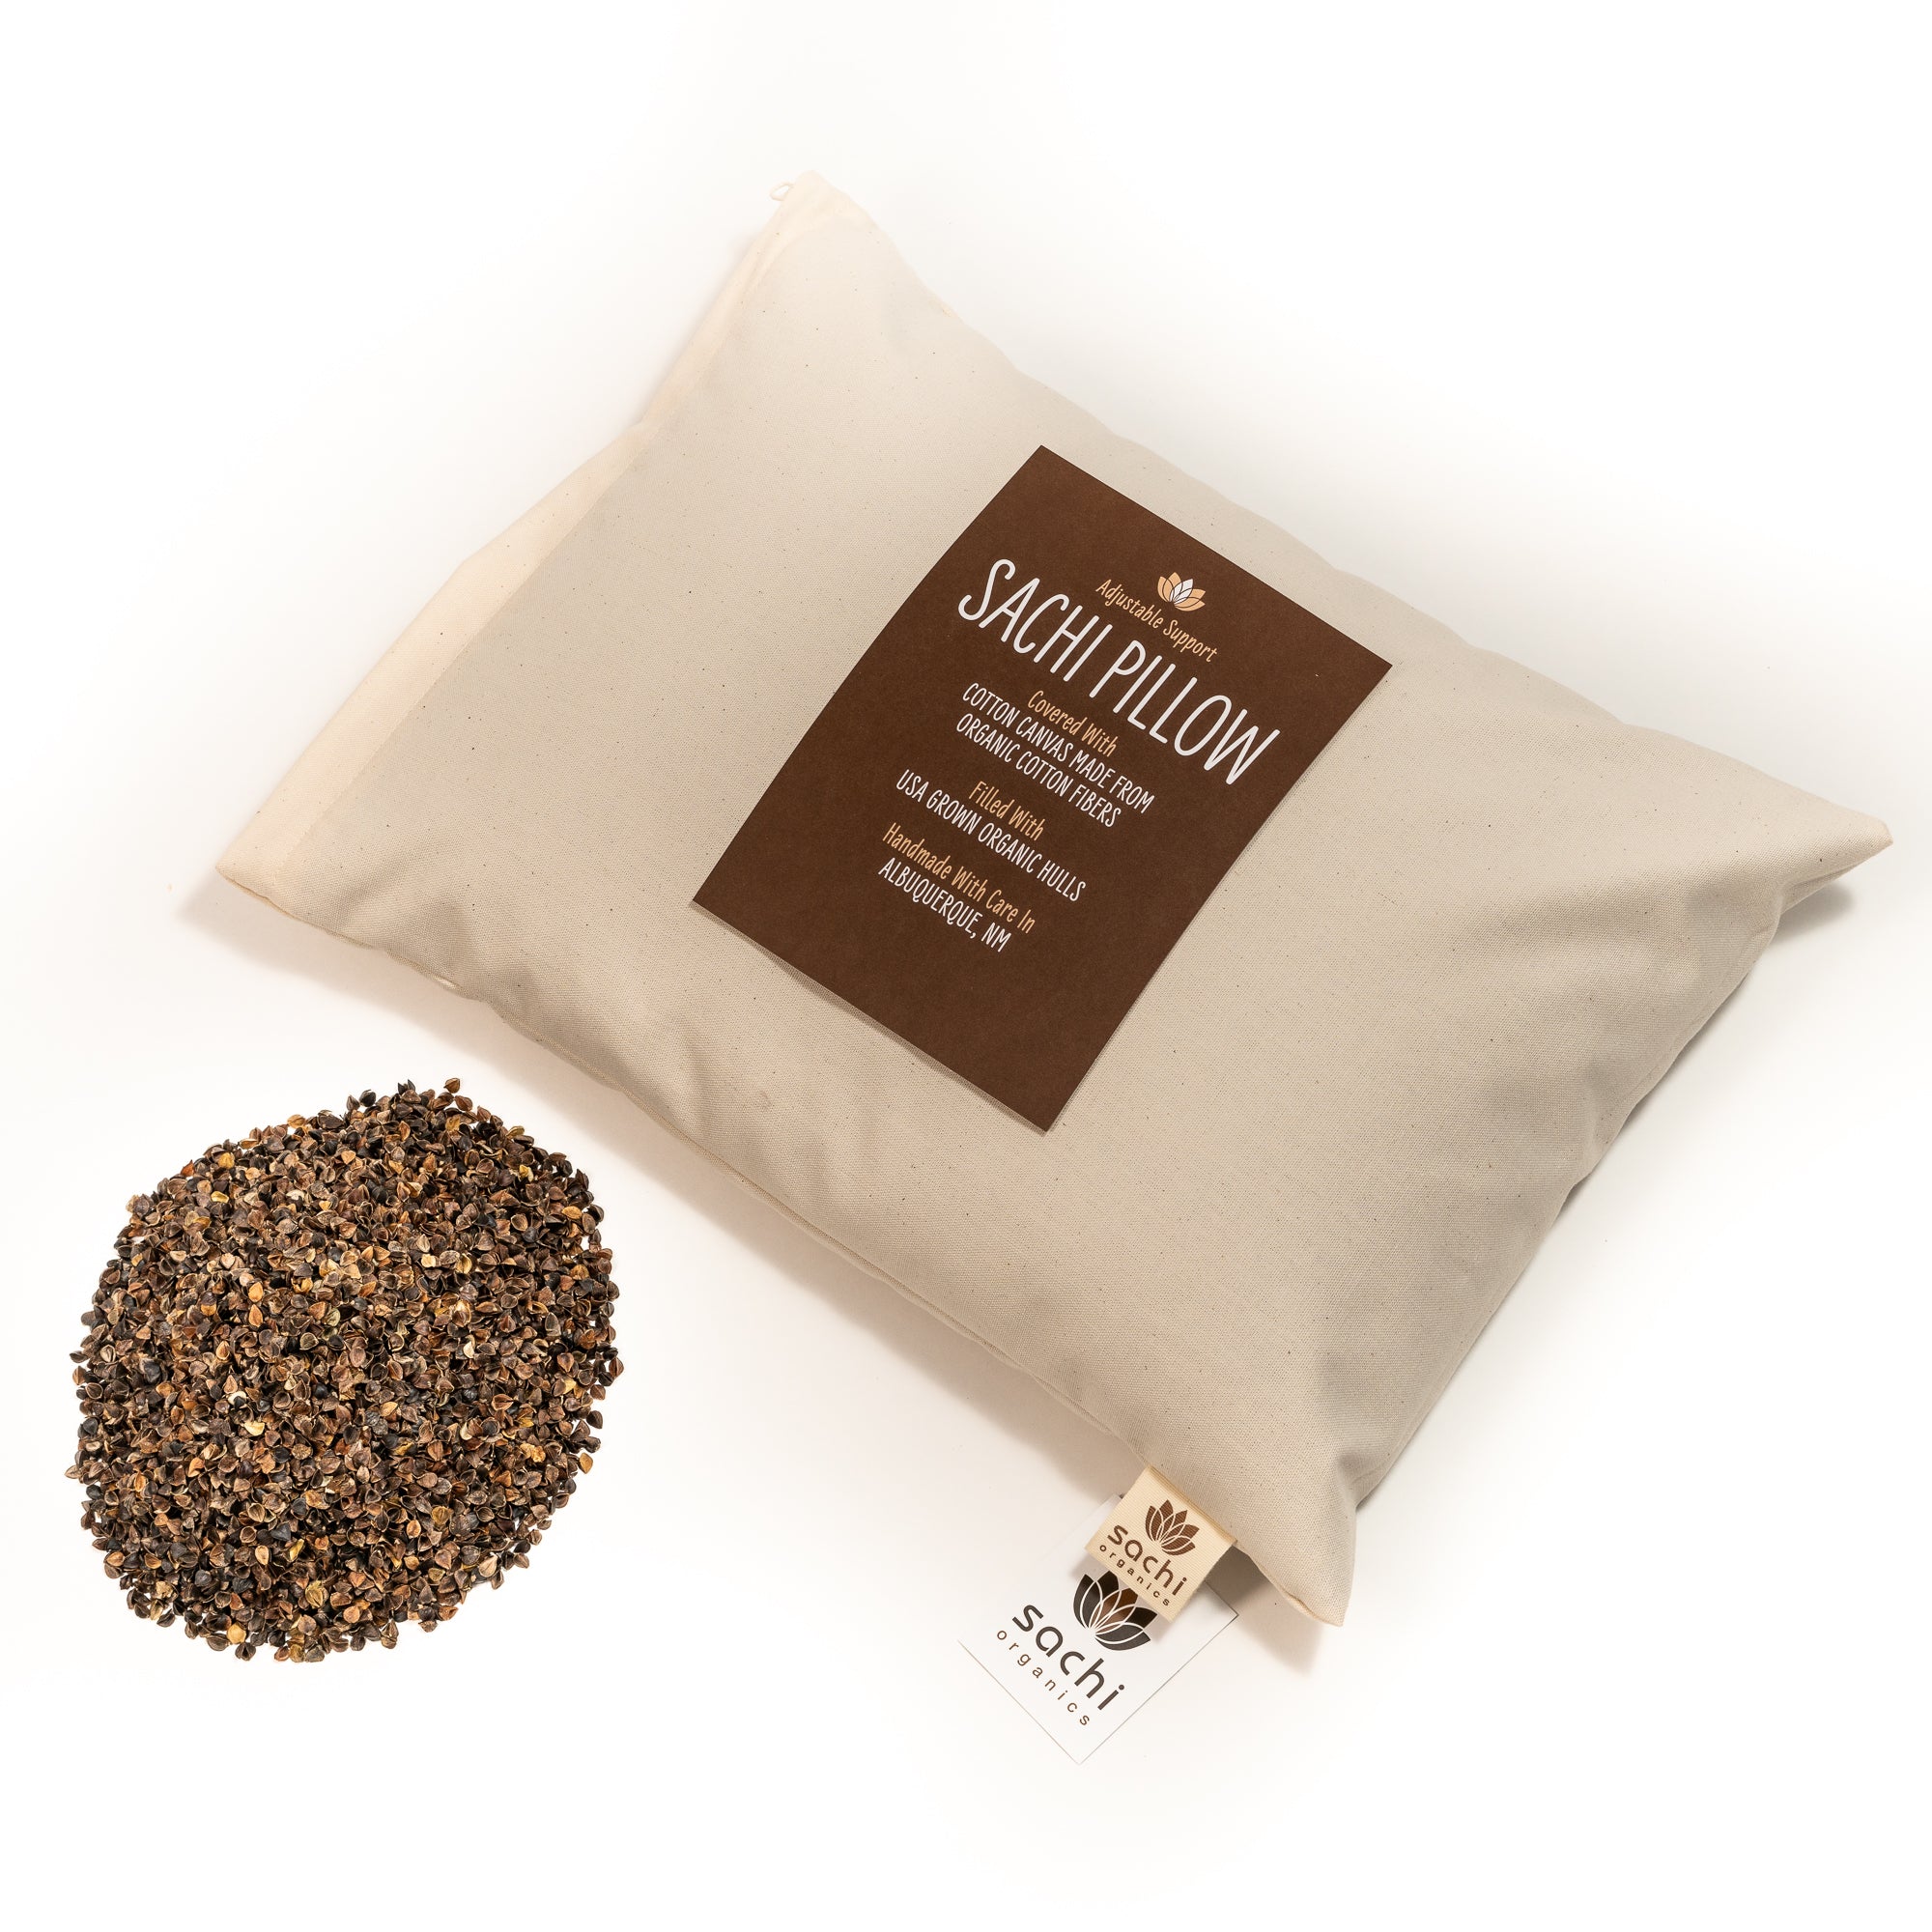 Bulk Buckwheat Hulls for Use in a Pillow: What's Best?